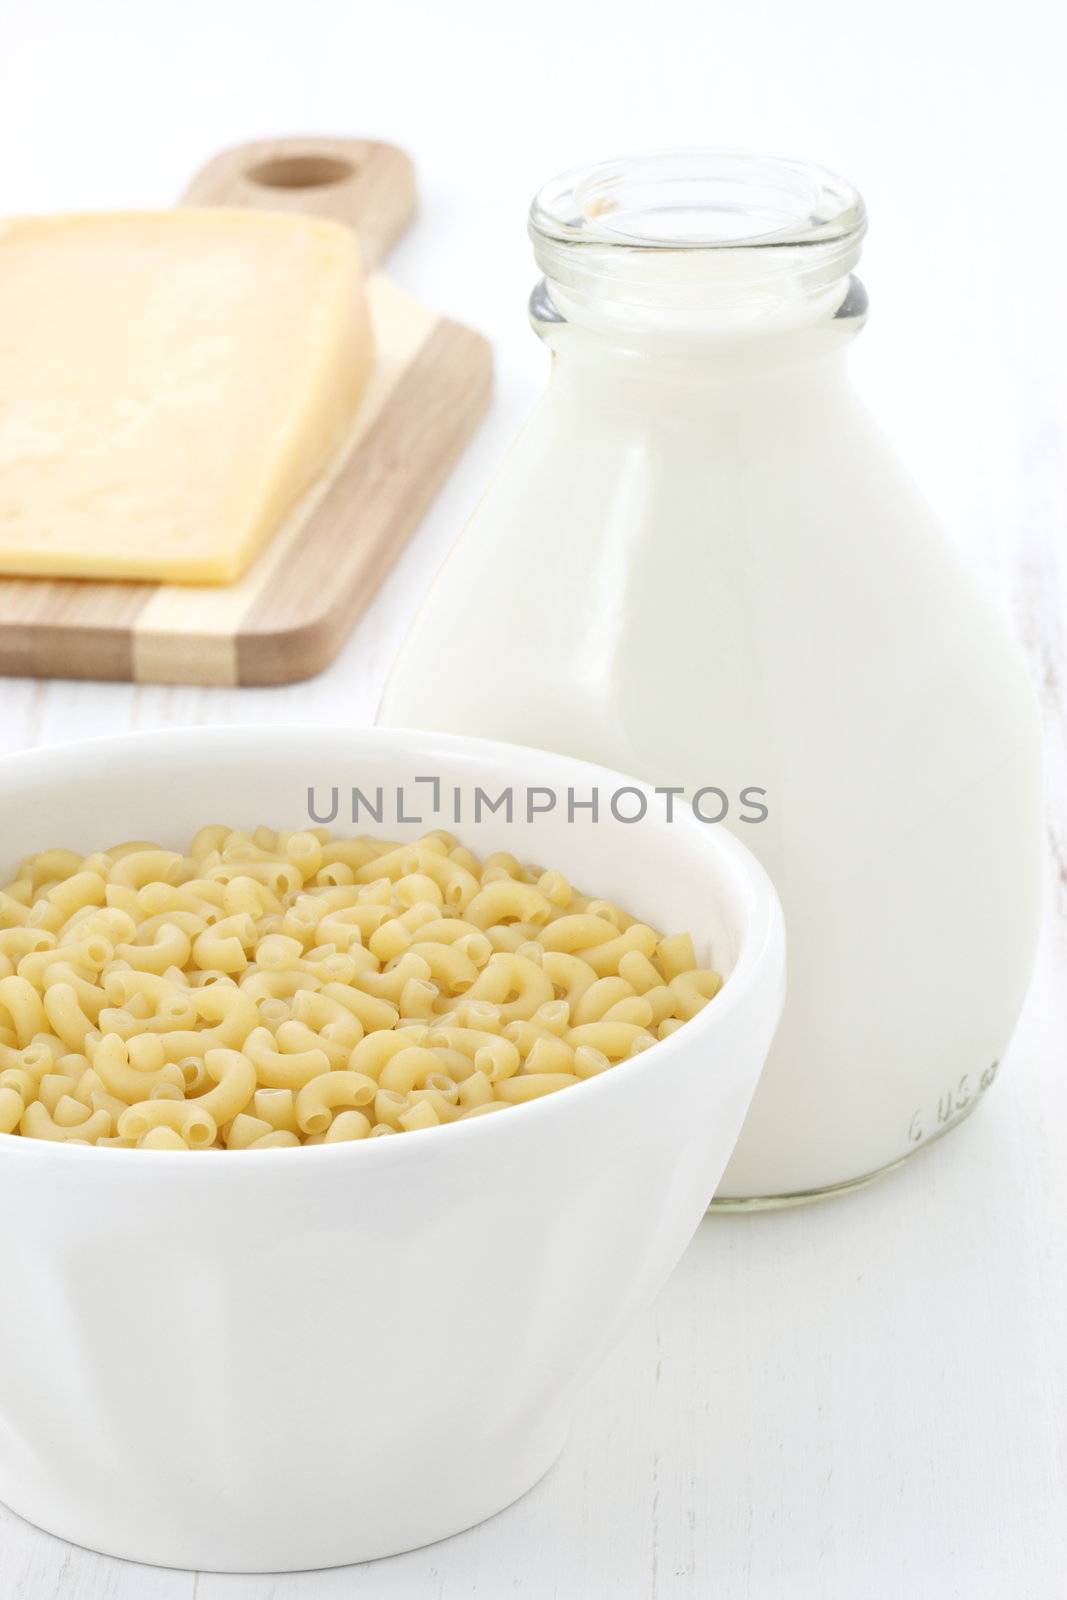 Gourmet macaroni and cheese ingredients. by tacar